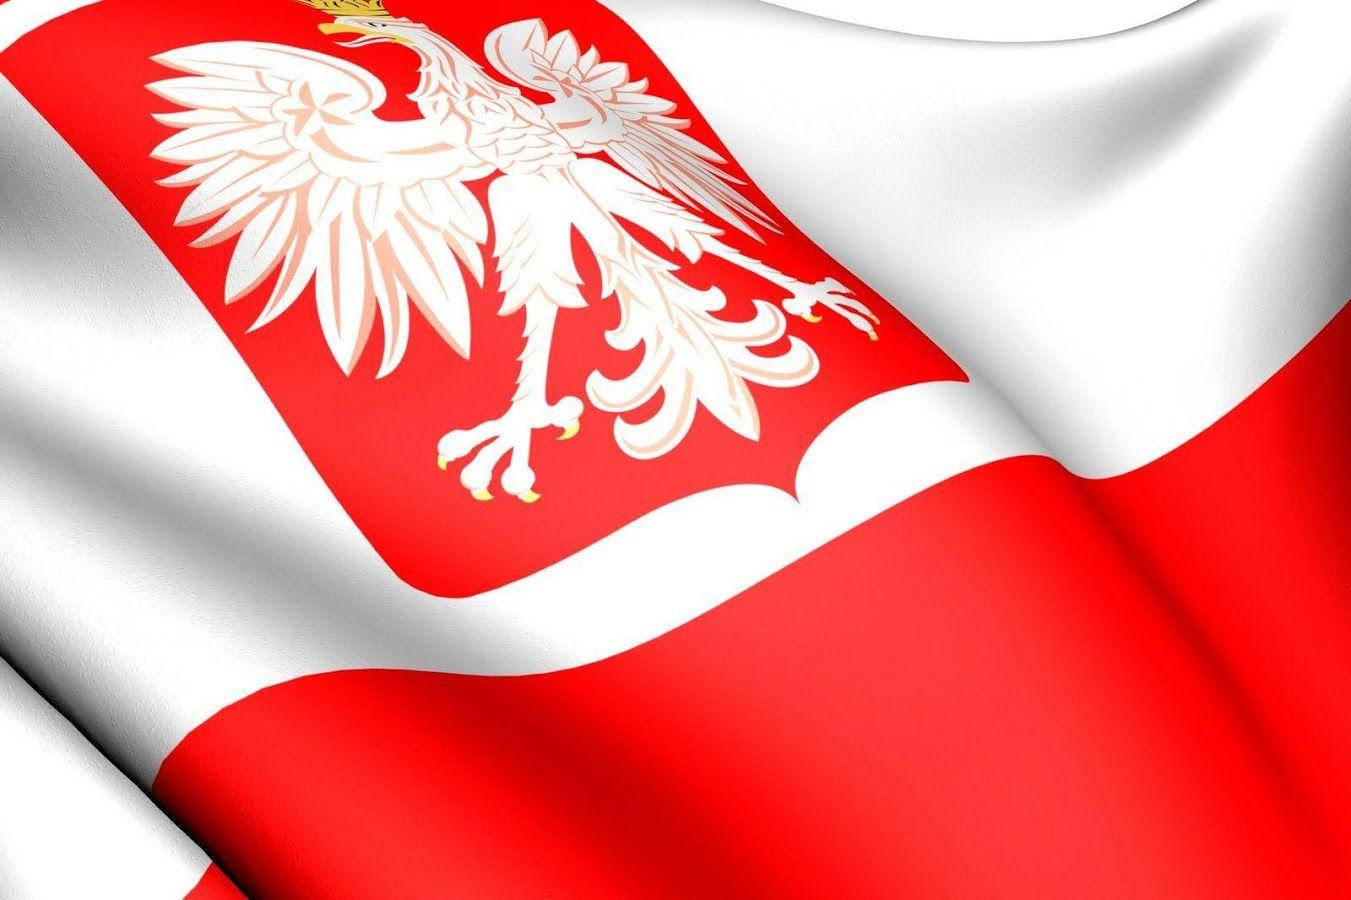 The proud Polish flag fluttering in the wind against a clear blue sky. Wallpaper